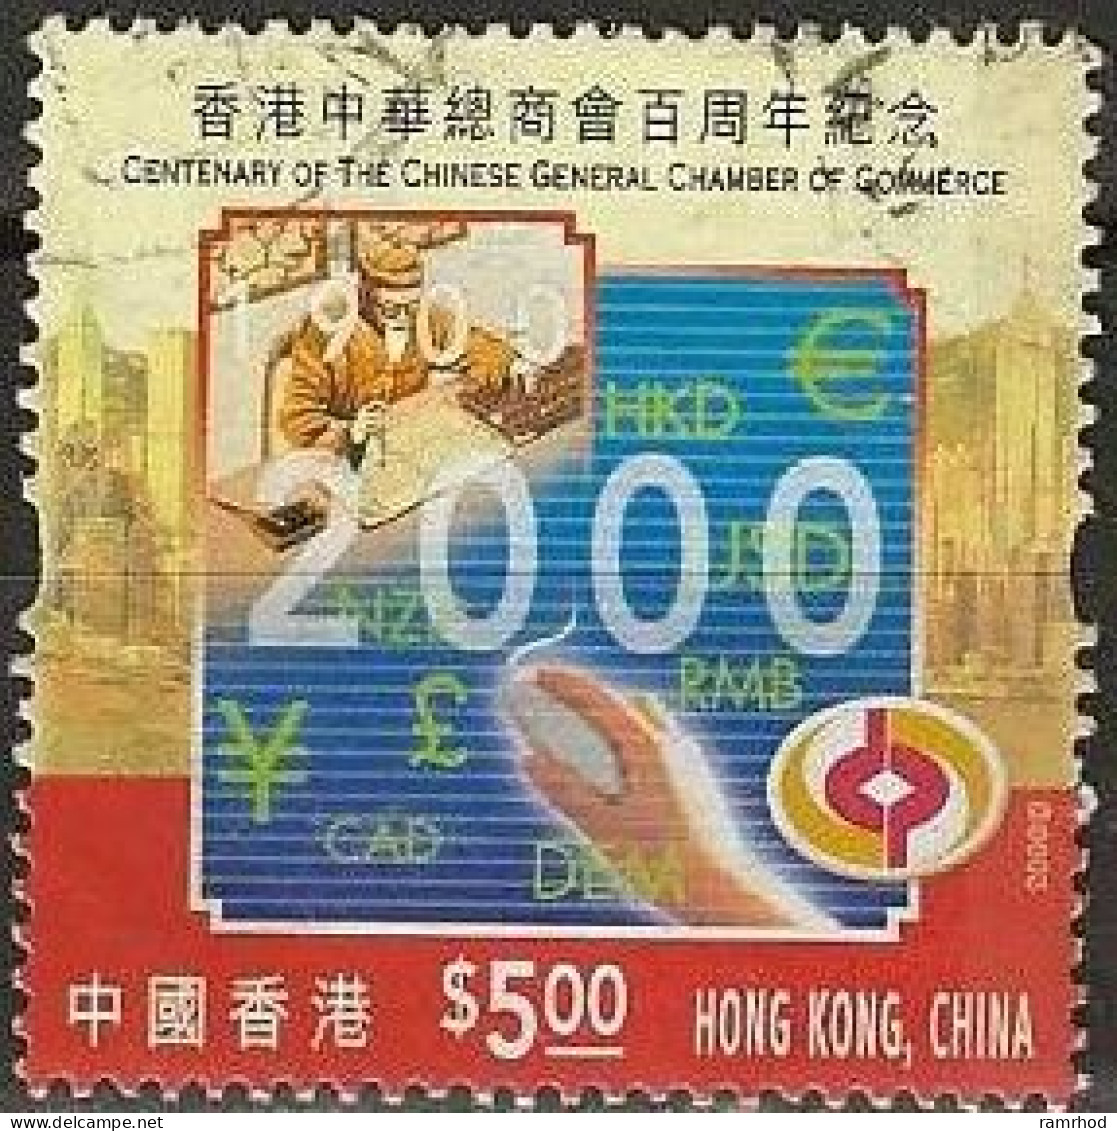 HONG KONG 2000 Centenary Of General Chamber Of Commerce - $5 - Man Using Abacus And Hand Using Mouse FU - Used Stamps